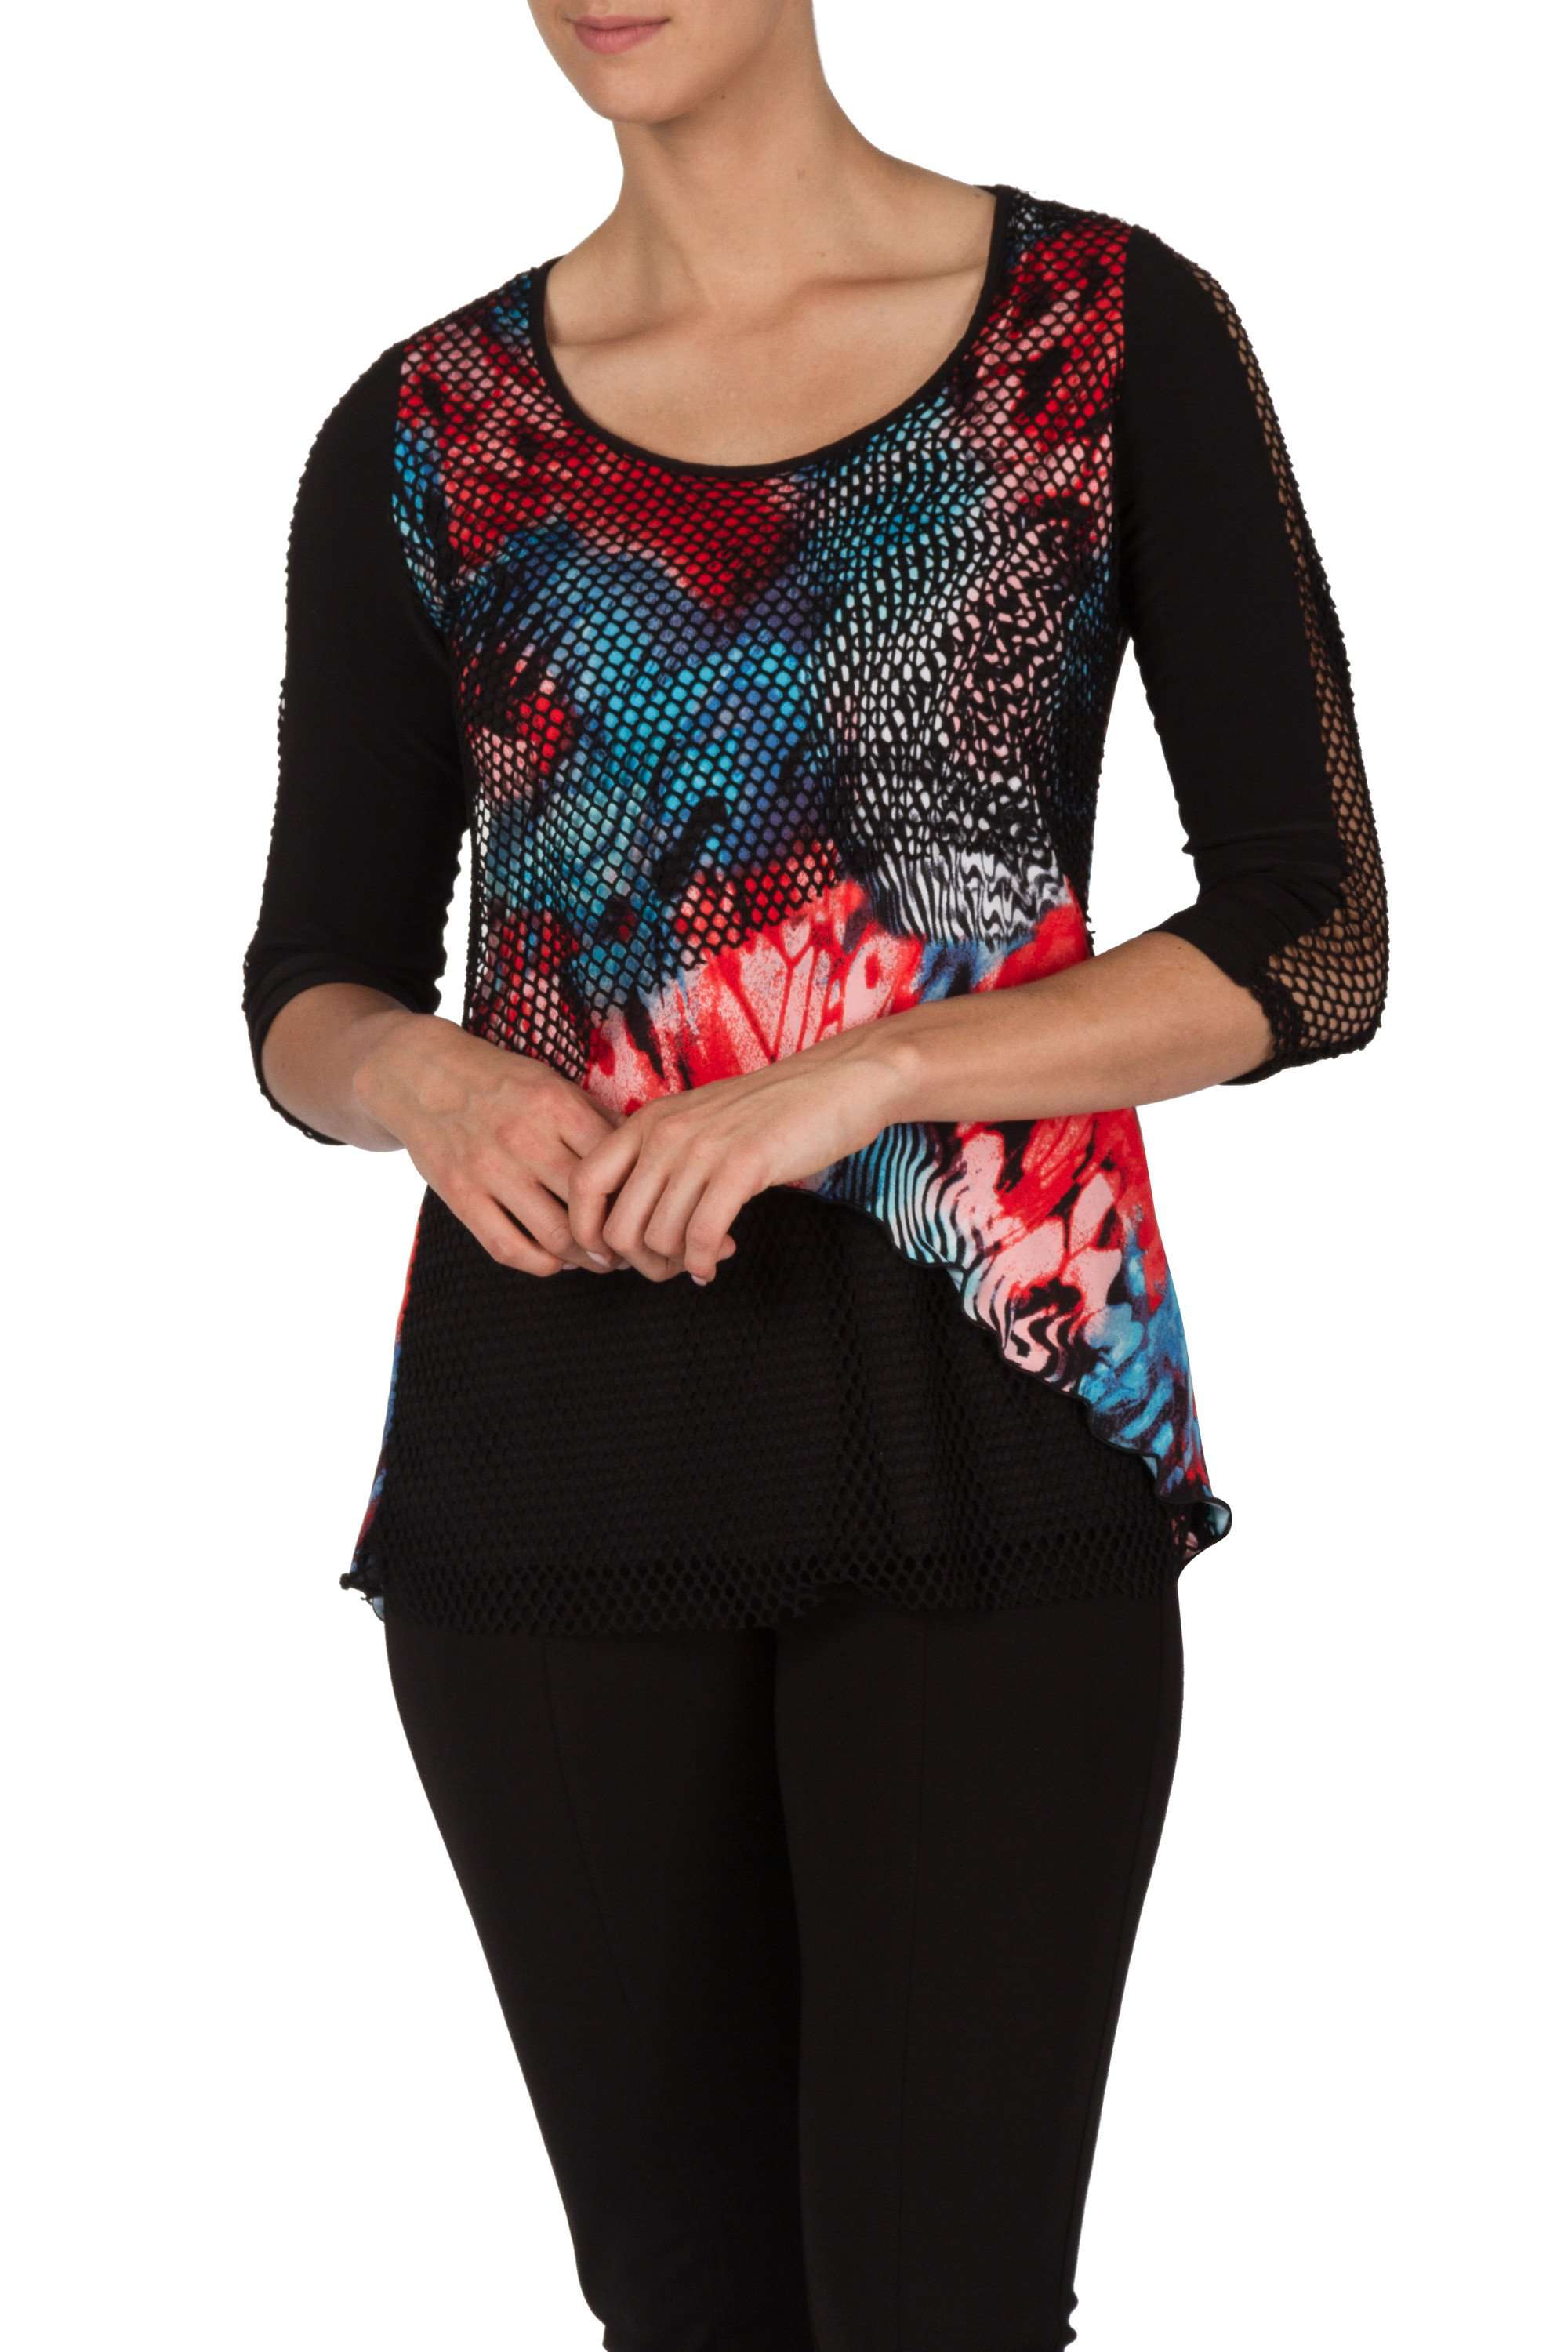 Women's Tops on Sale Canada XLARGE Sizes Black Multi Color Print with Cool Mesh Made in Canada Now 50 Off - Yvonne Marie - Yvonne Marie